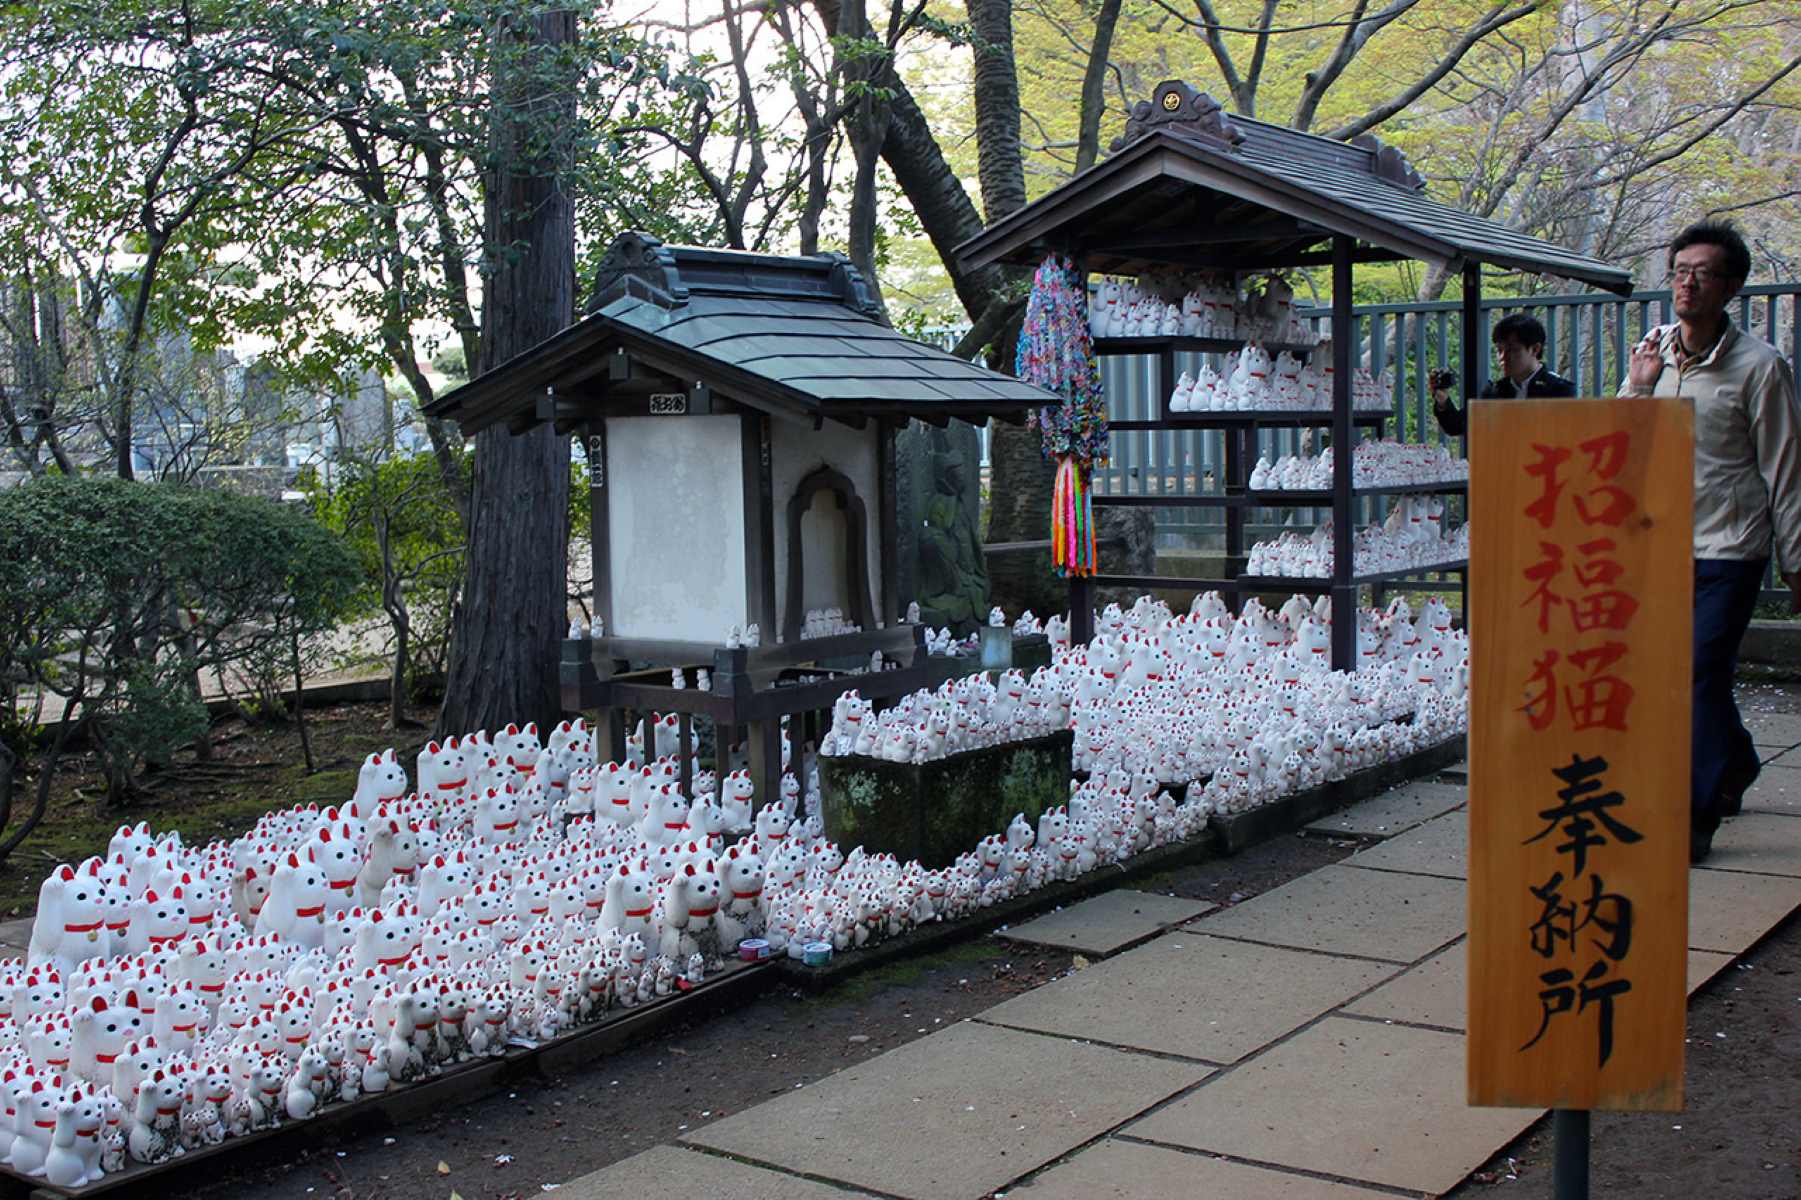 16-surprising-facts-about-gotokuji-temple